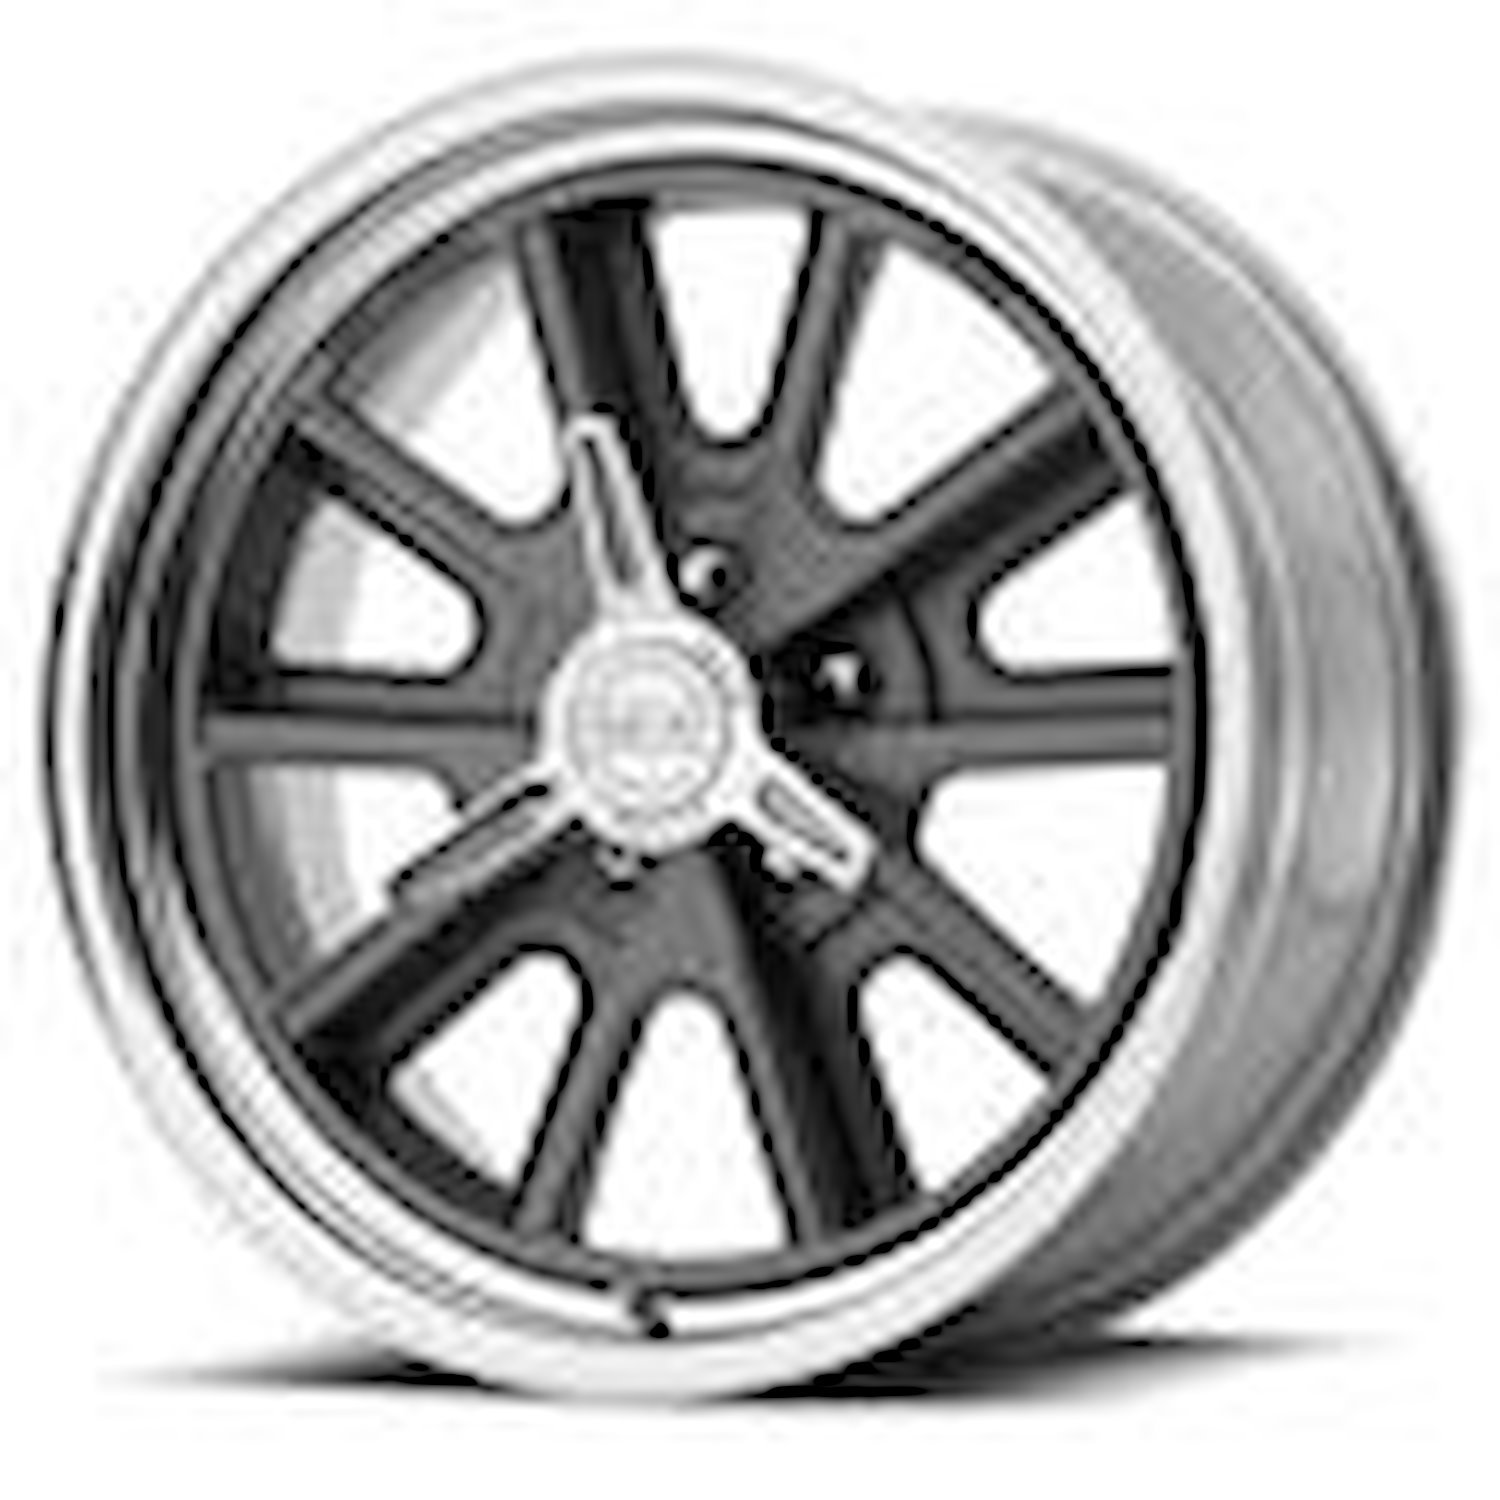 AMERICAN RACING 427 SHELBY COBRA TWO-PIECE MAG GRAY CENTER POLISHED BARREL 17 x 8 5x4.5 -6 4.26